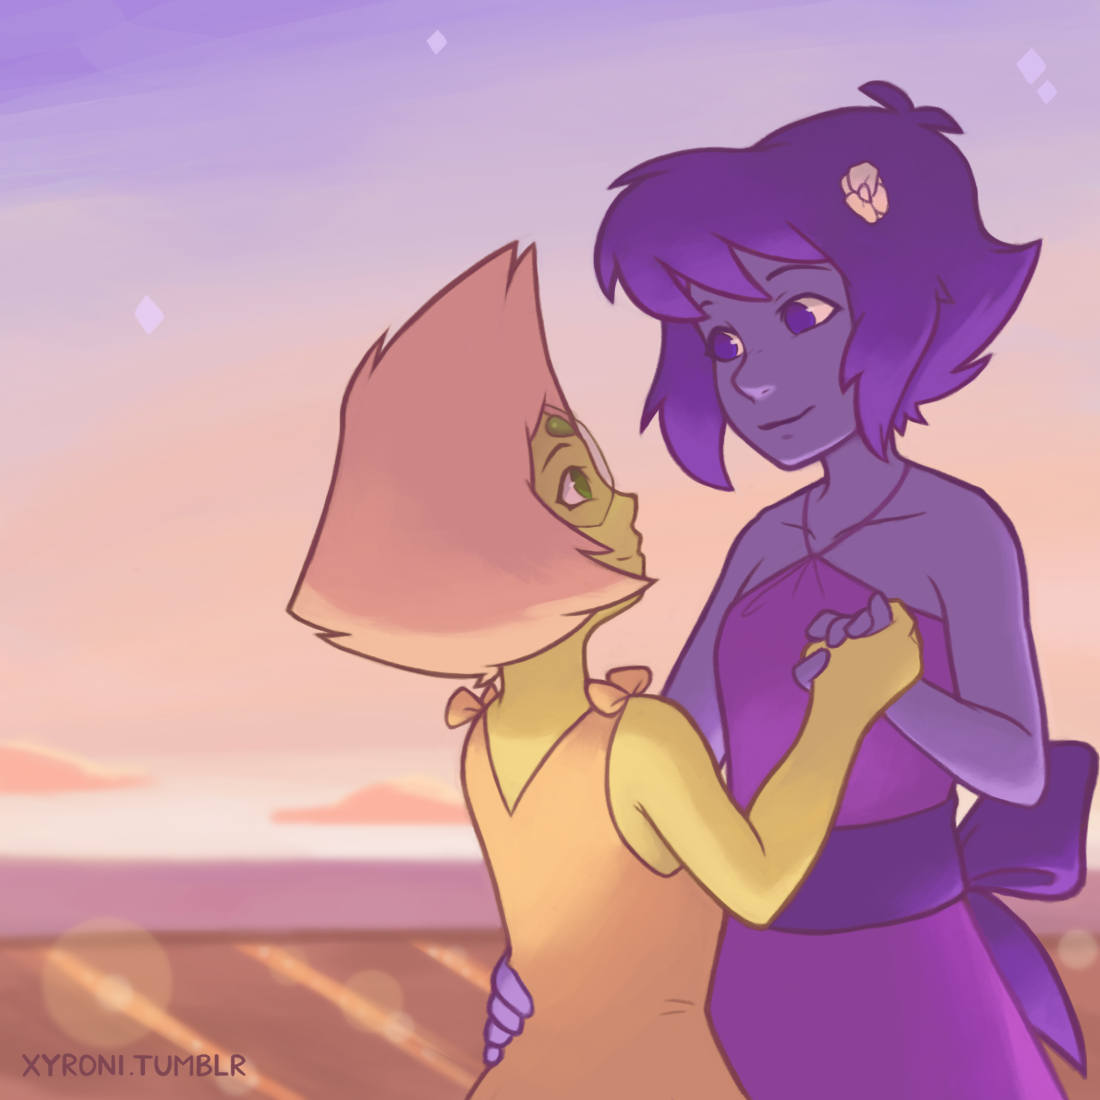 Need some dose of lapidot in my life uwu